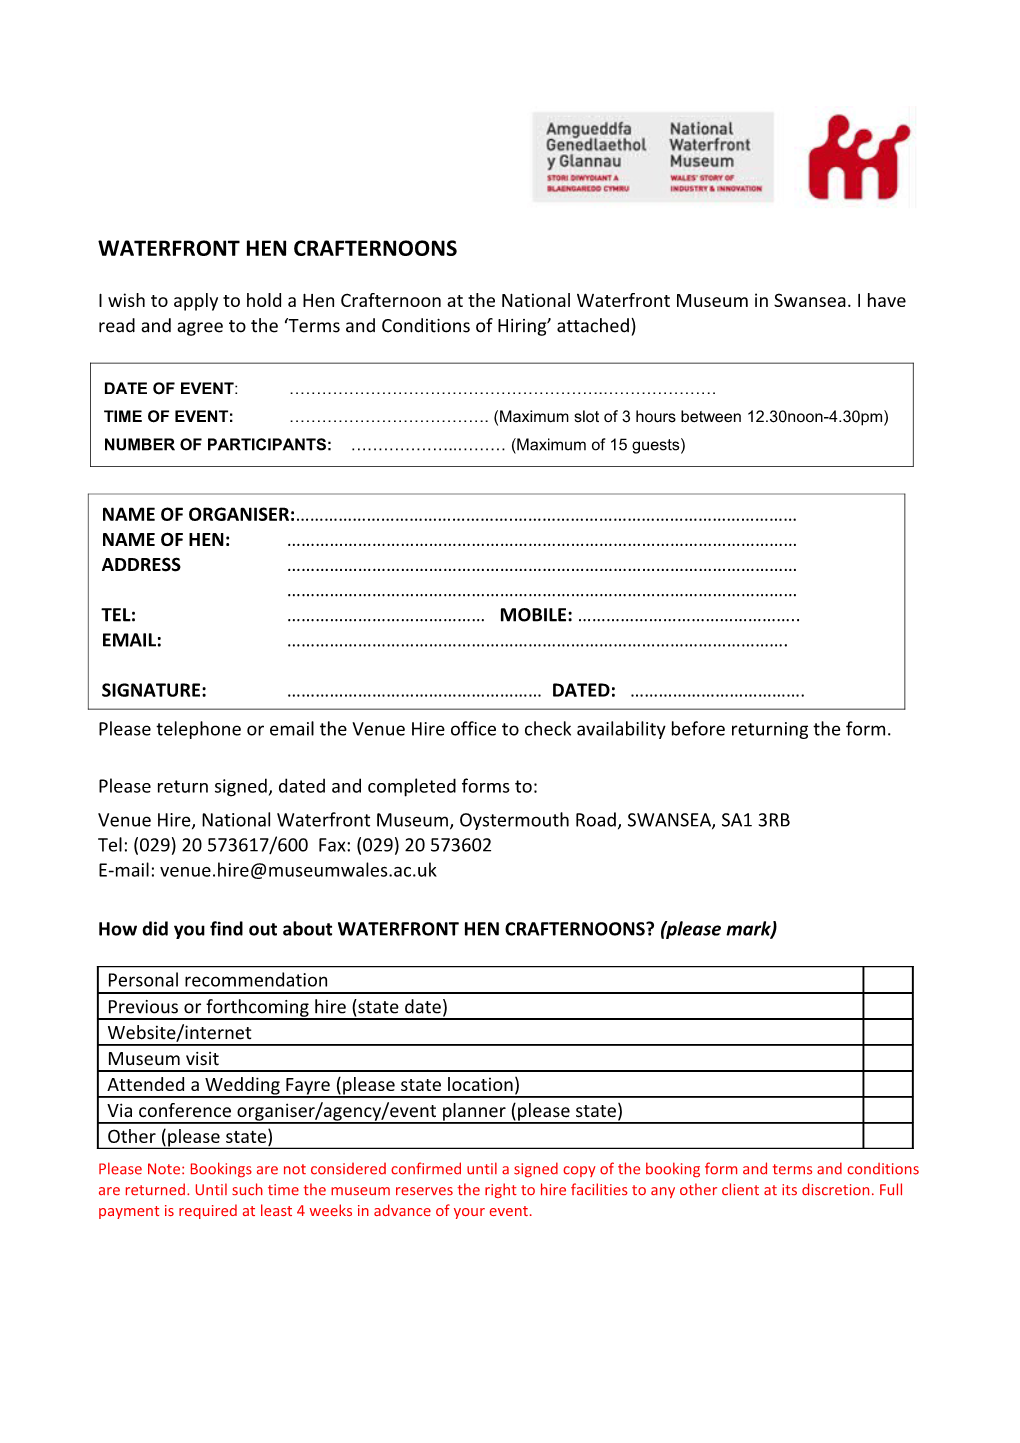 Birthday Party Booking Form NMC